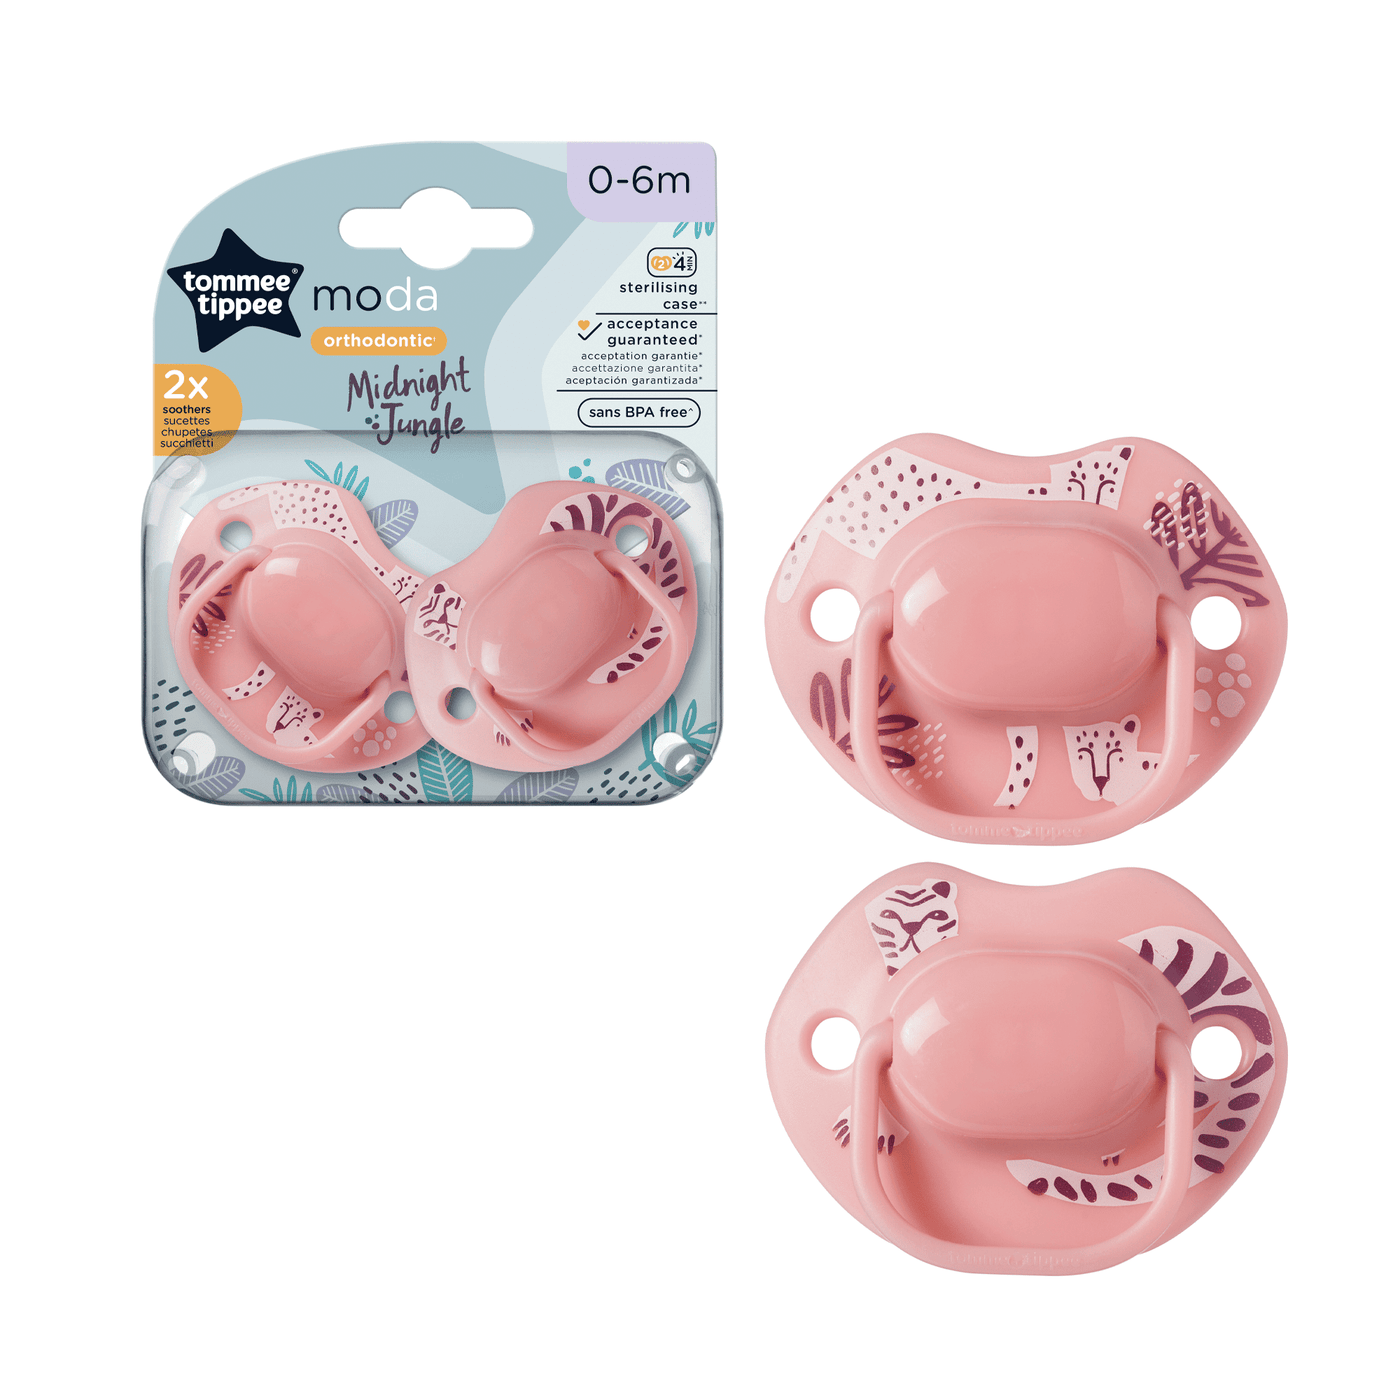 Tommee Tippee Moda Orthodontic Soothers 0-6 months 2 Pack Midnight Jungle - Pink Pack